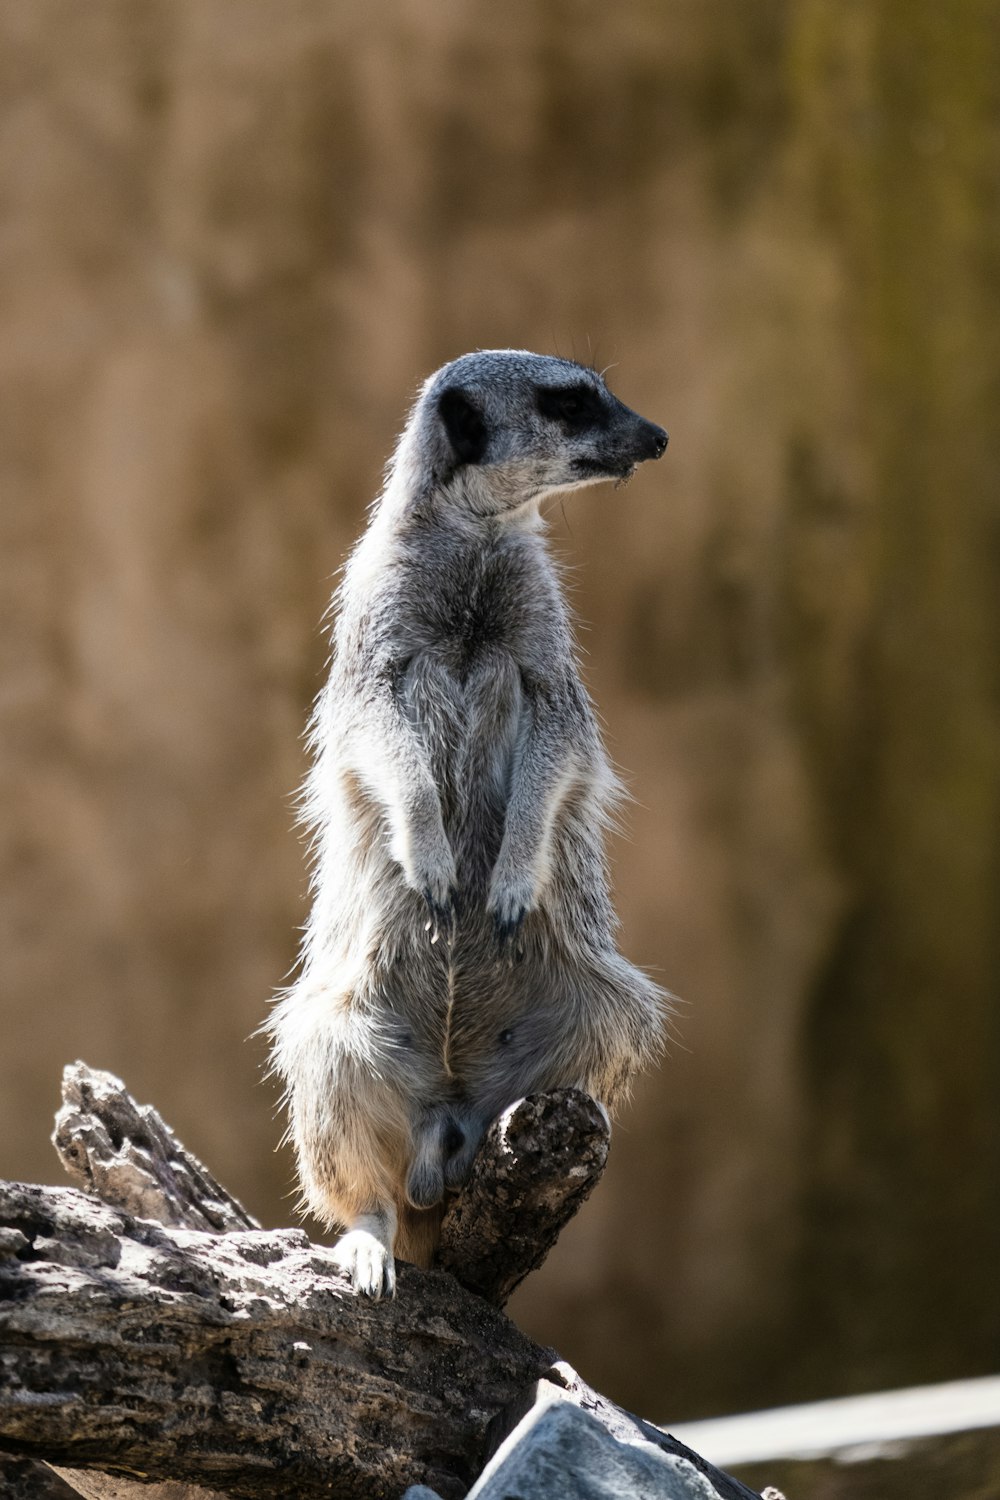 a small meerkat standing on a tree branch